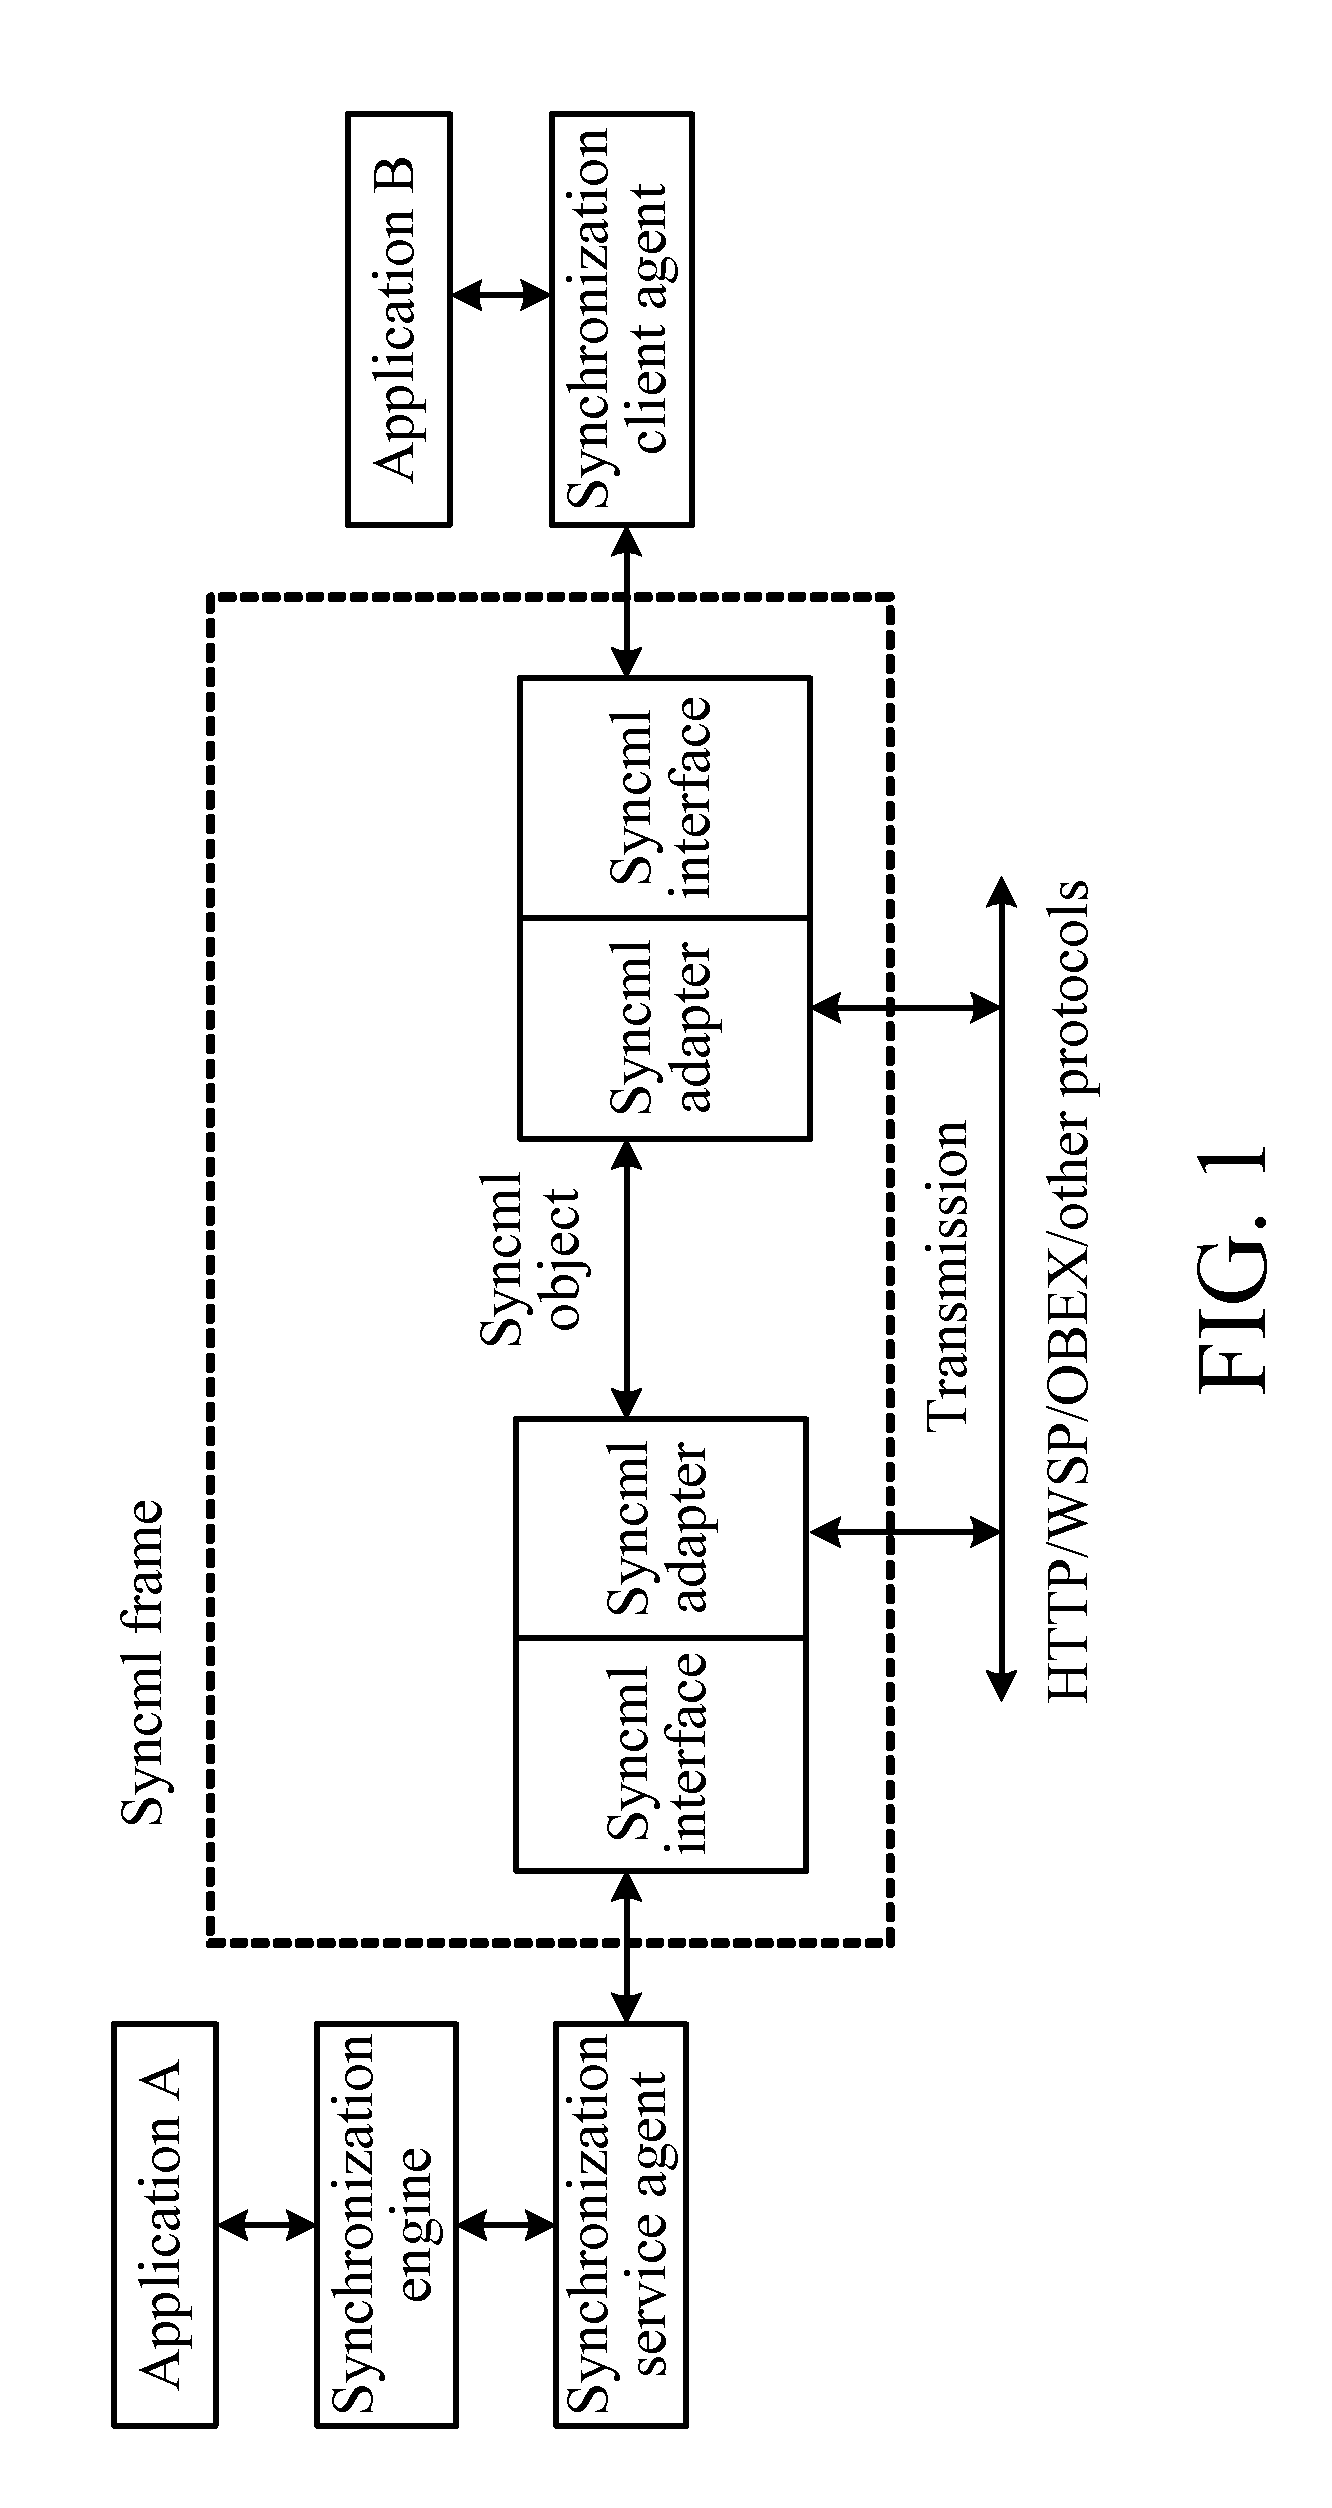 Method, system, and device for data synchronization